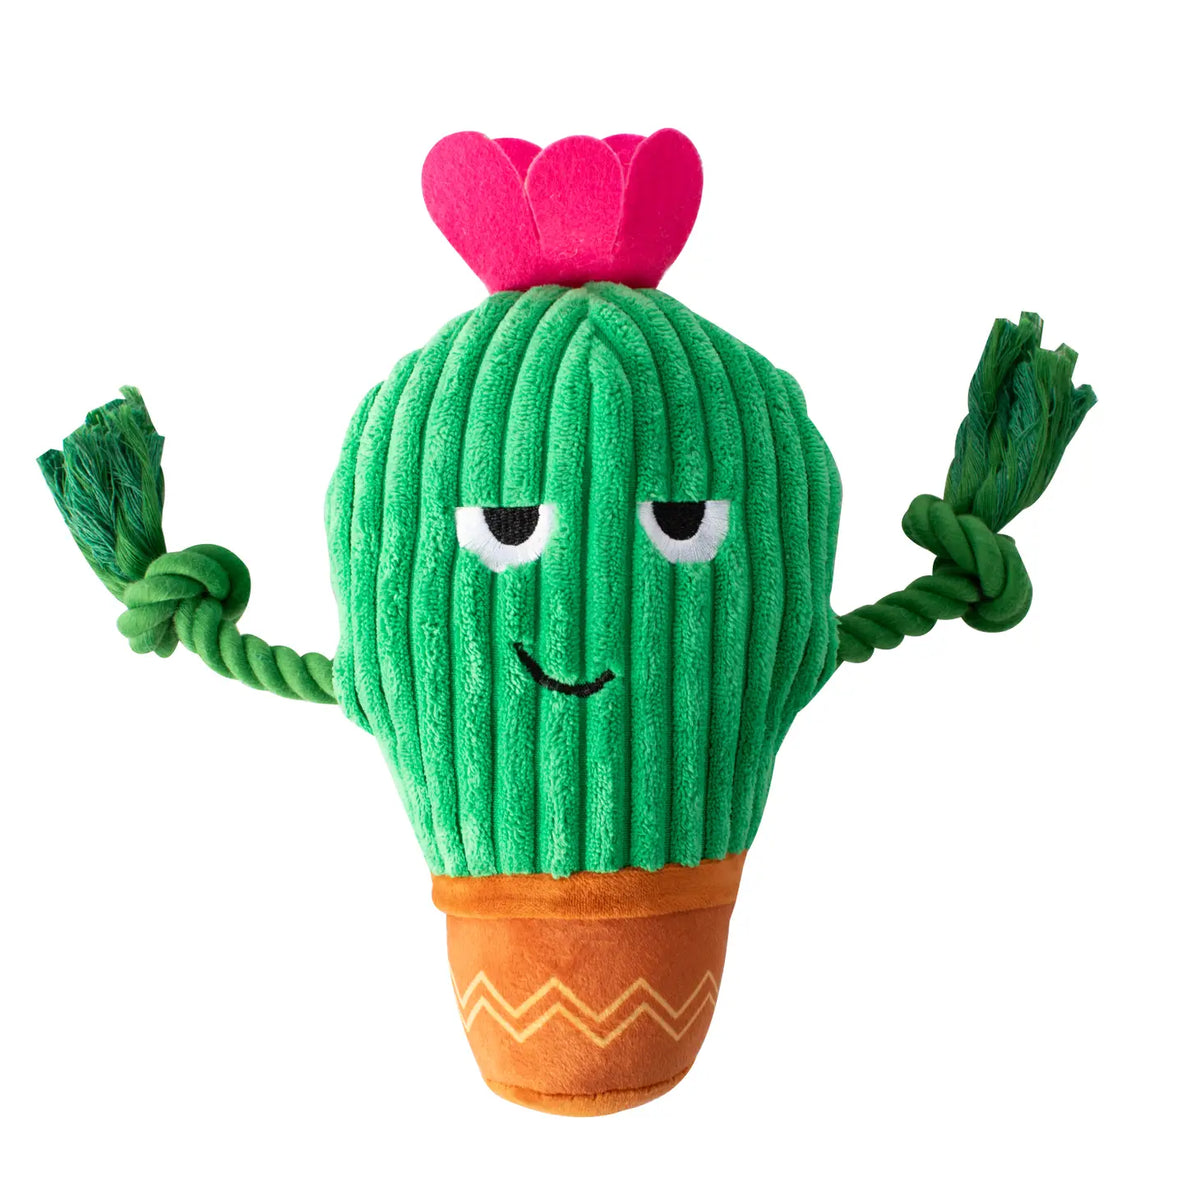 Petshop by Fringe Studio - Dog Toy You Grow Chica!